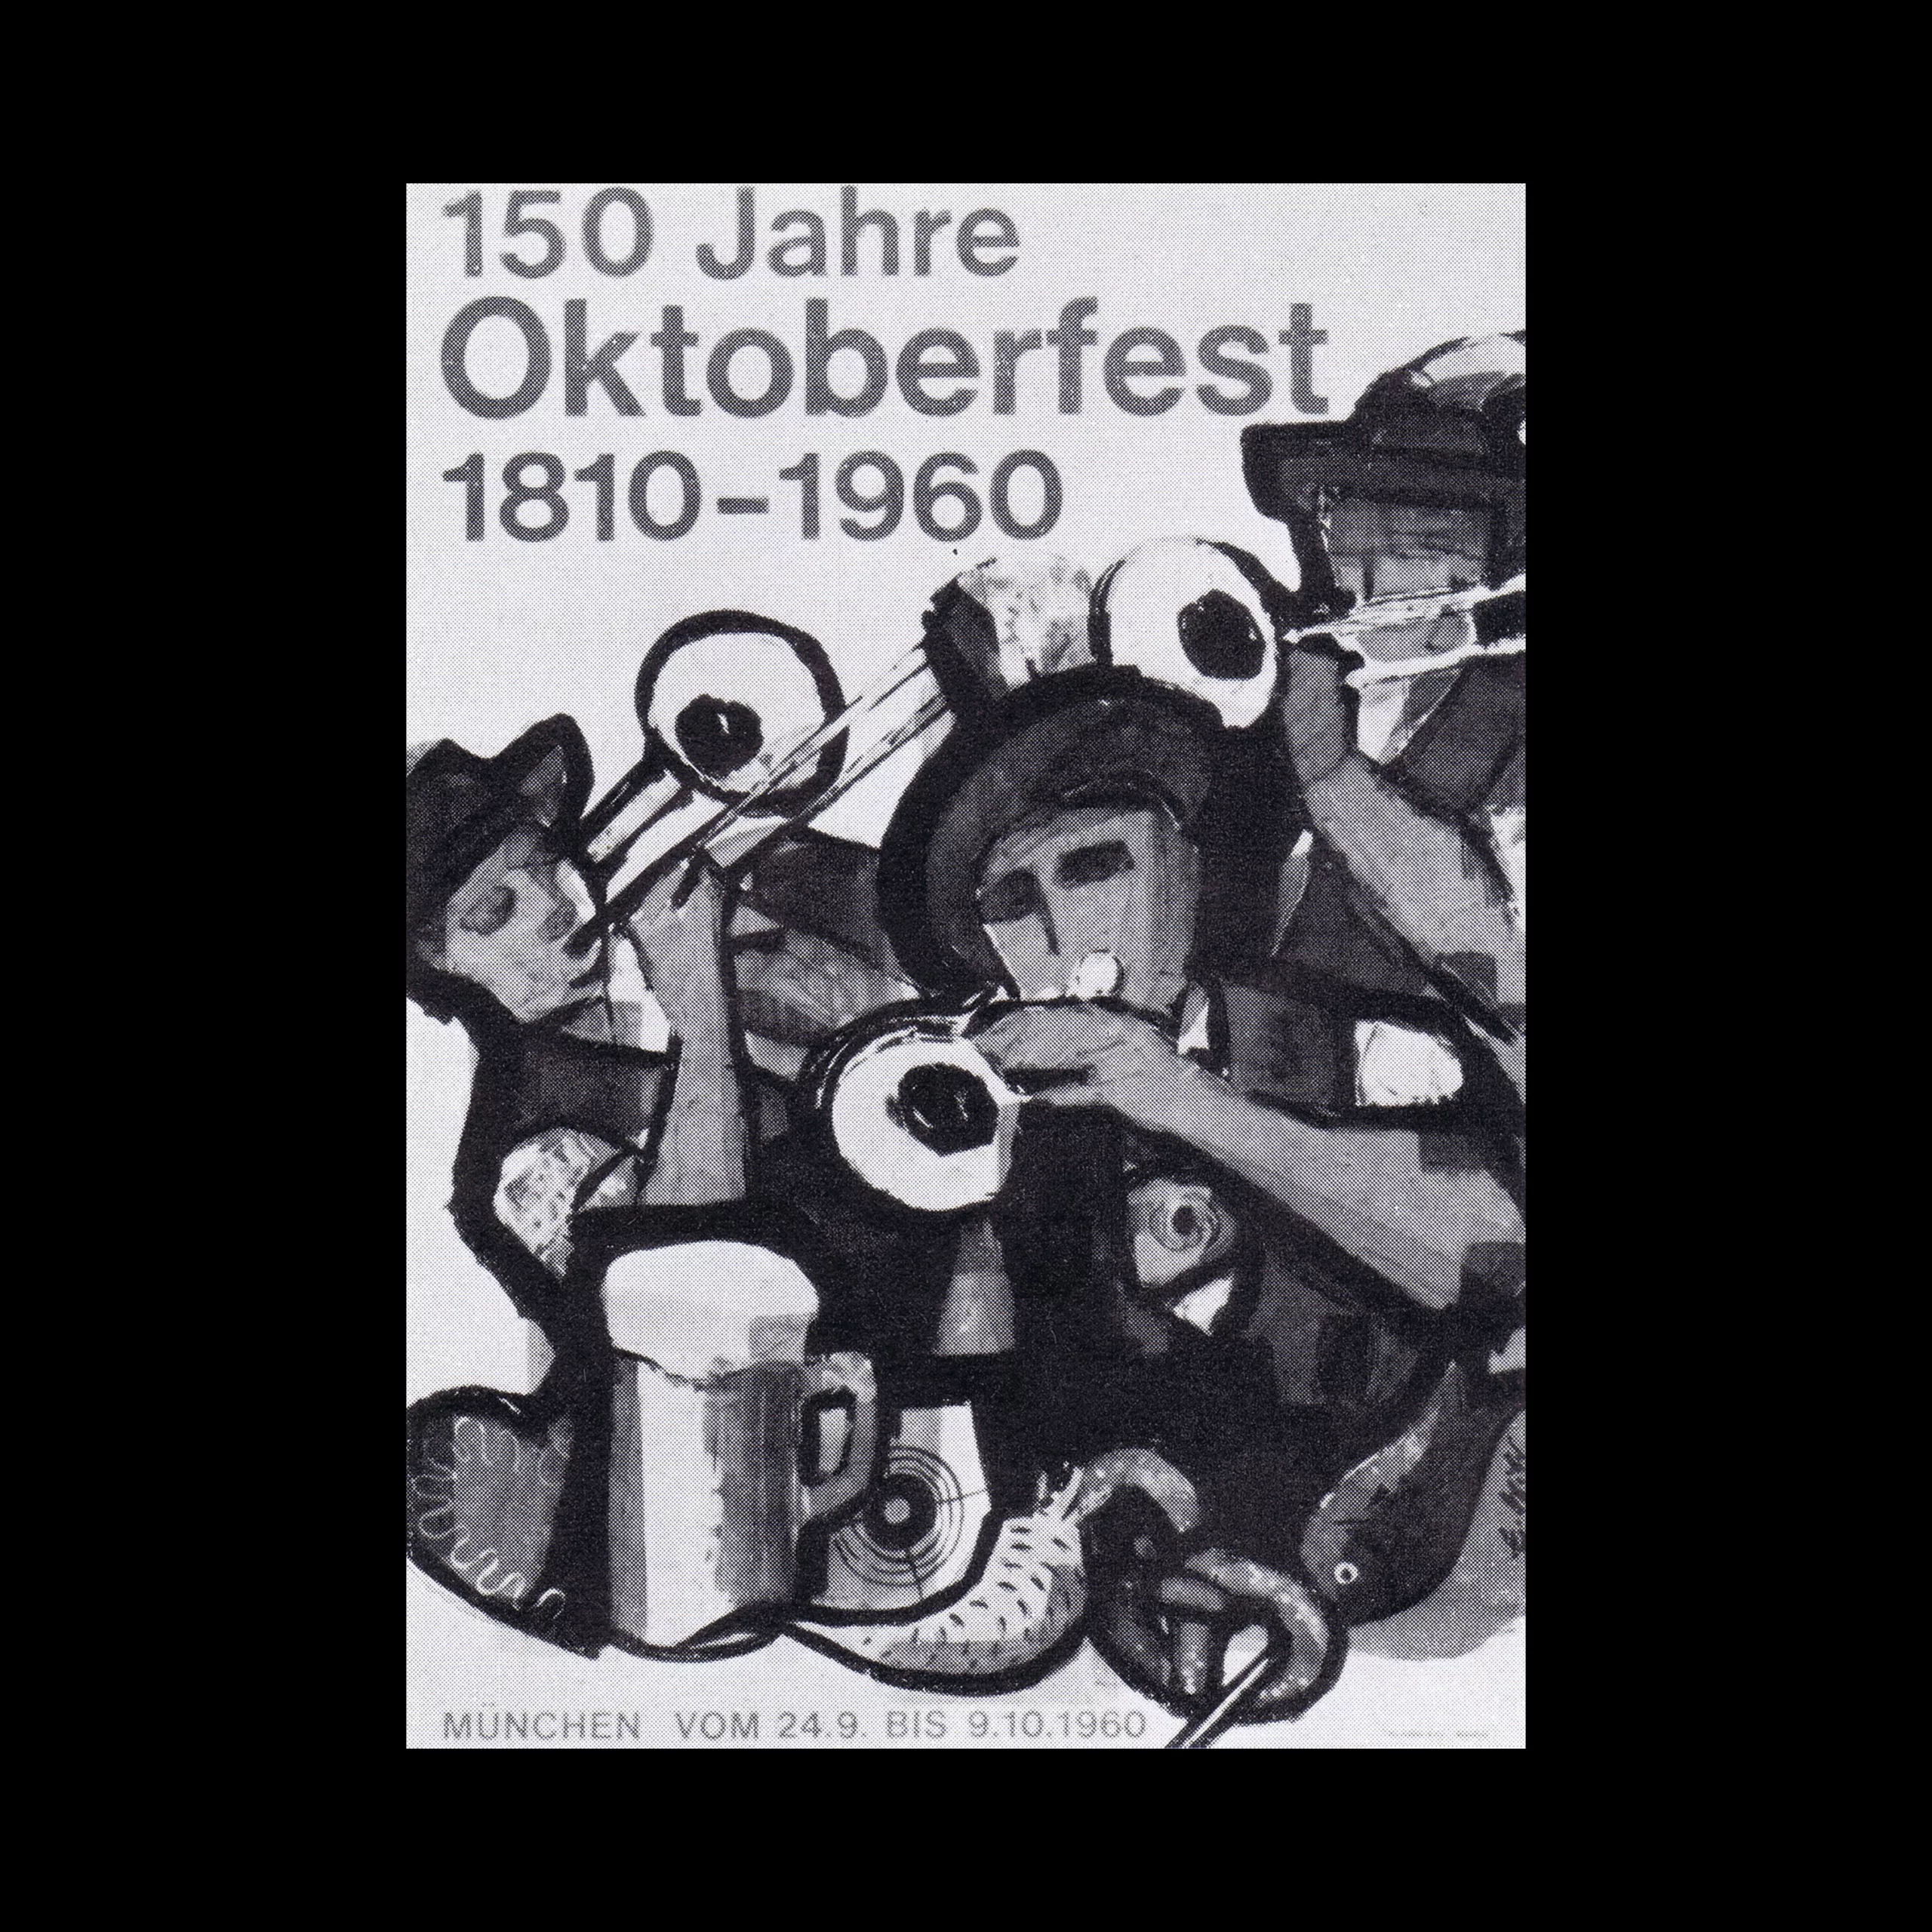 Poster for 150 Years of Oktoberfest designed by Ernst Wilde